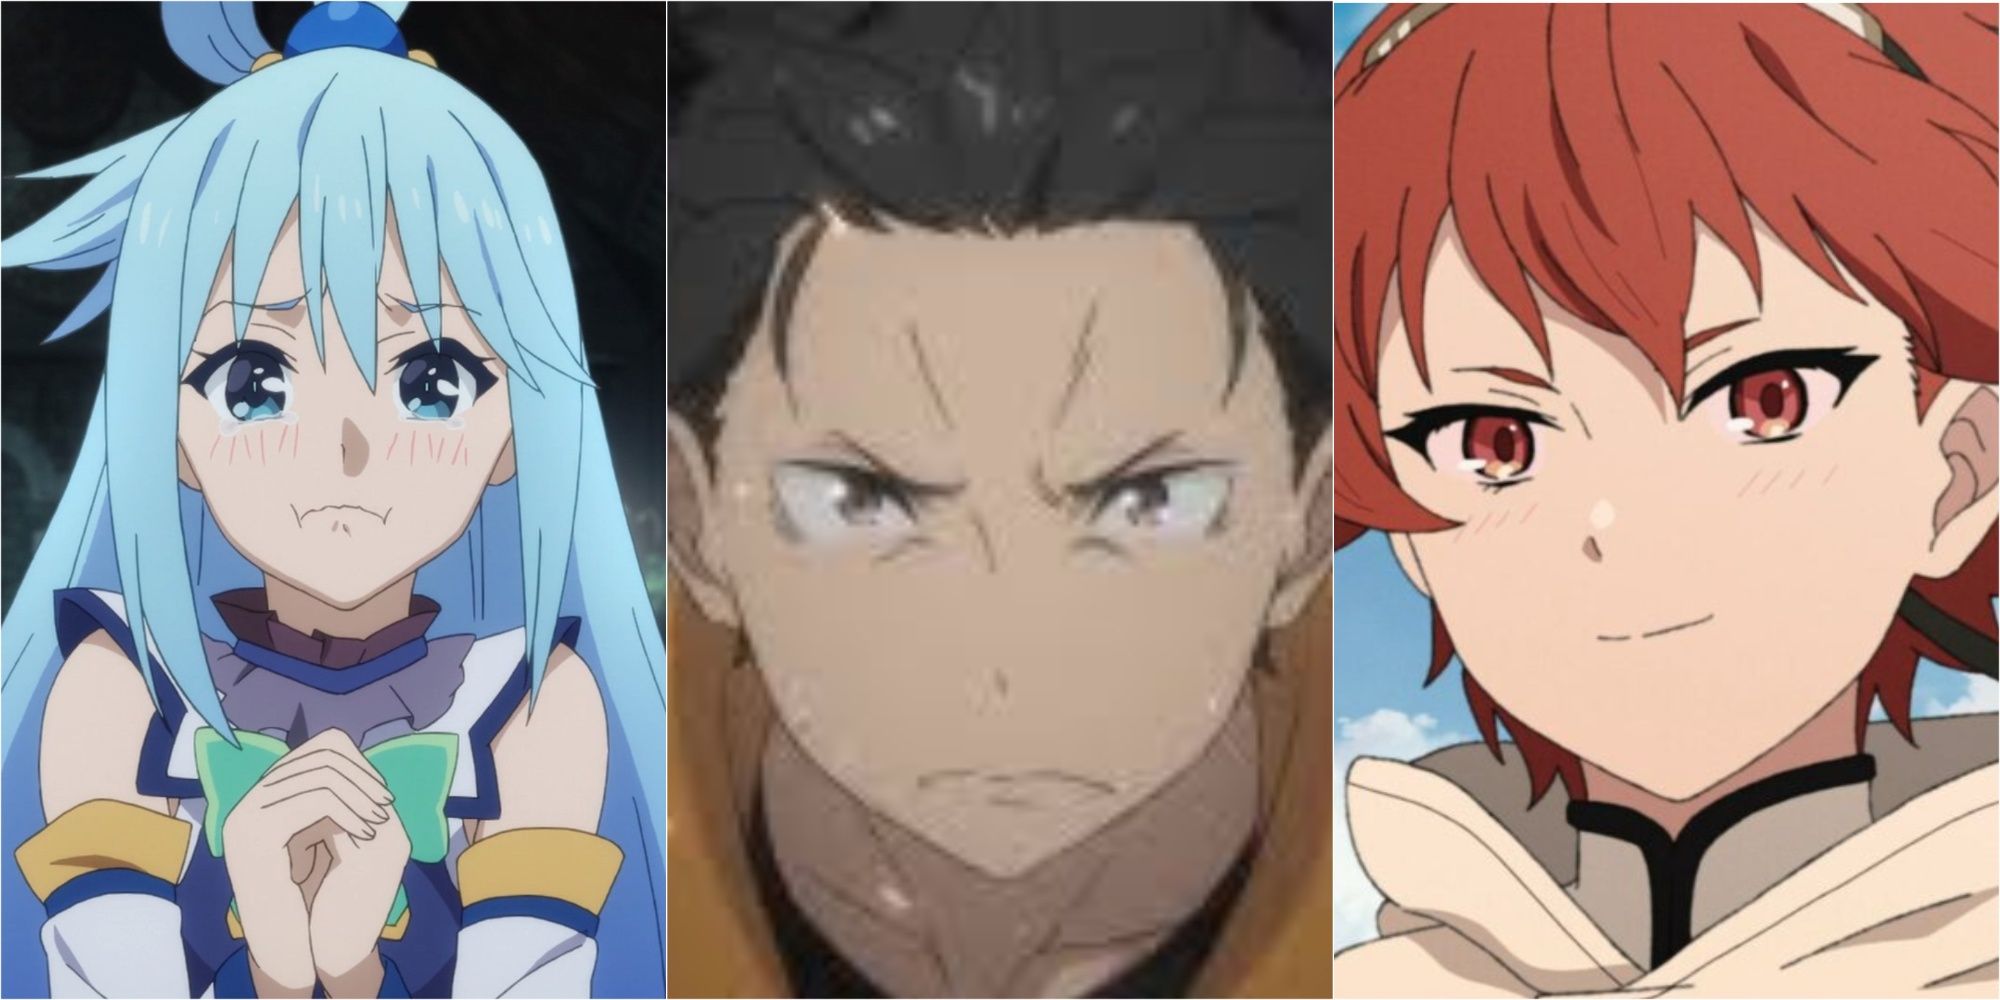 A feature image of characters from Mushoku Tensei, Konosuba, and Re: Zero-Starting Life In Another World